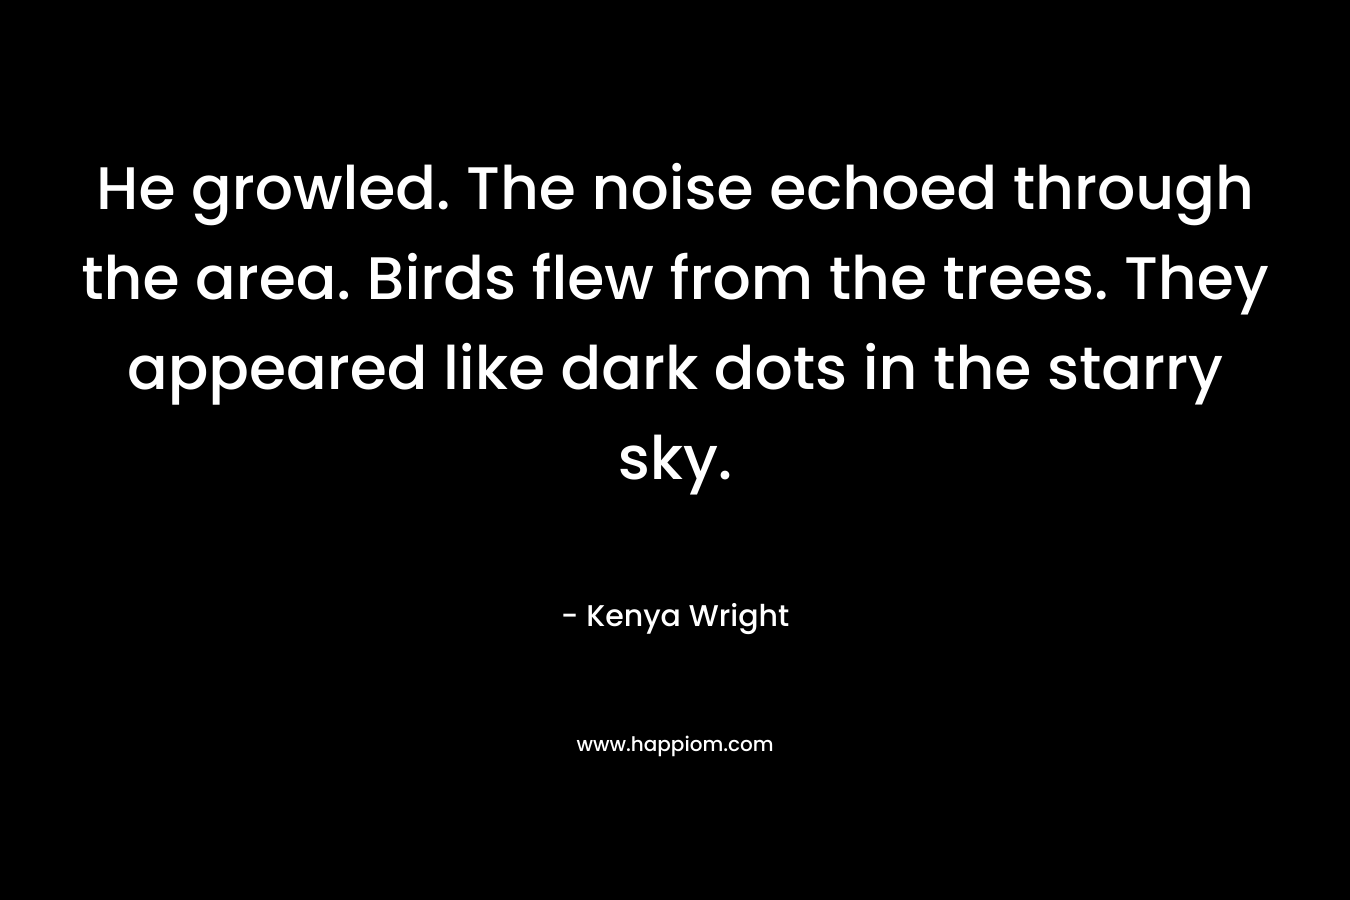 He growled. The noise echoed through the area. Birds flew from the trees. They appeared like dark dots in the starry sky.